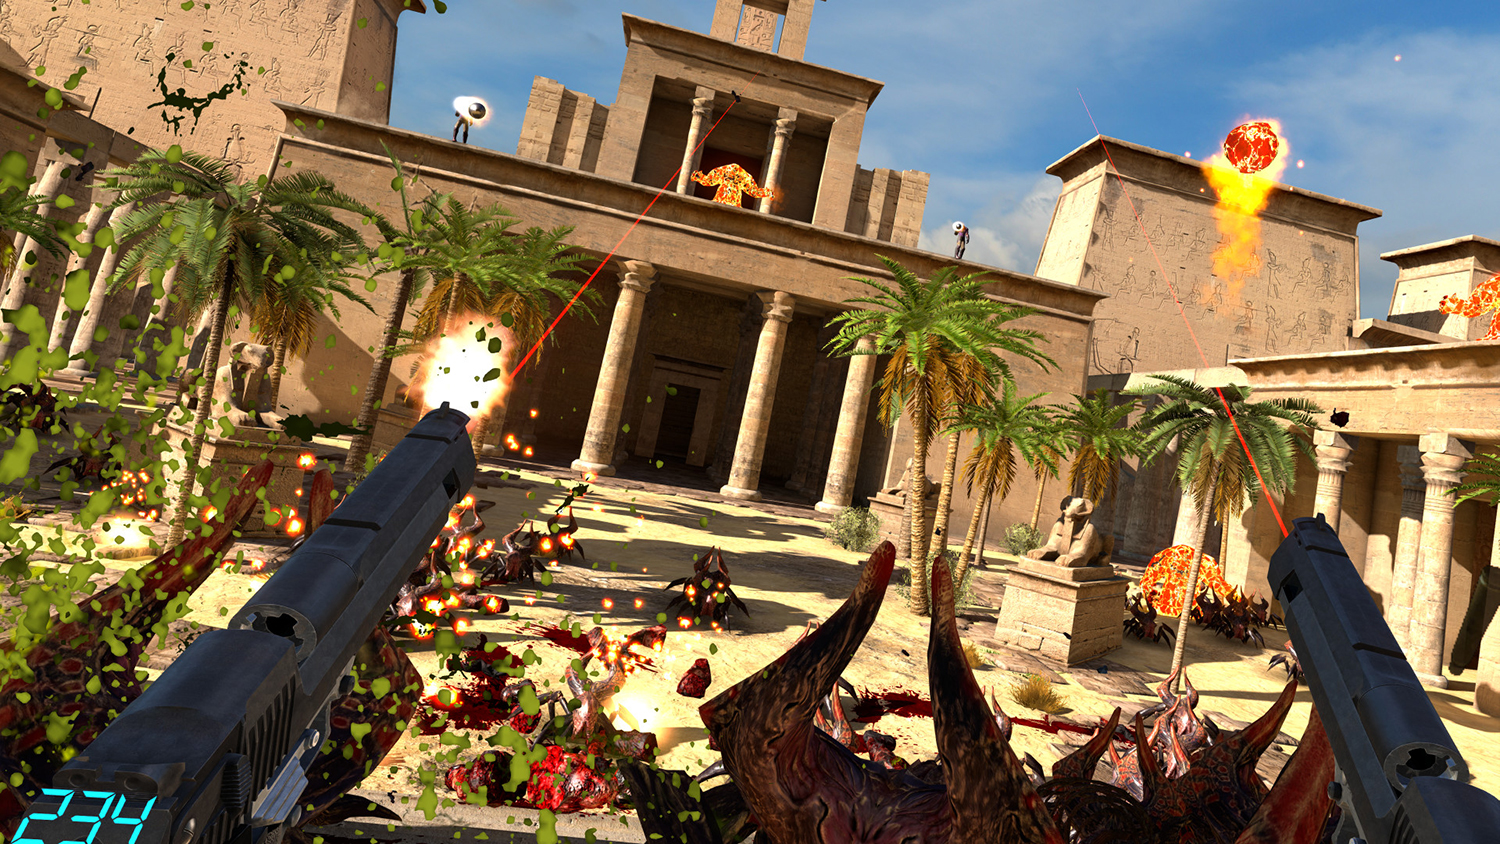 serious sam vr brings frantic fps action to oculus htc vive the last hope 0004